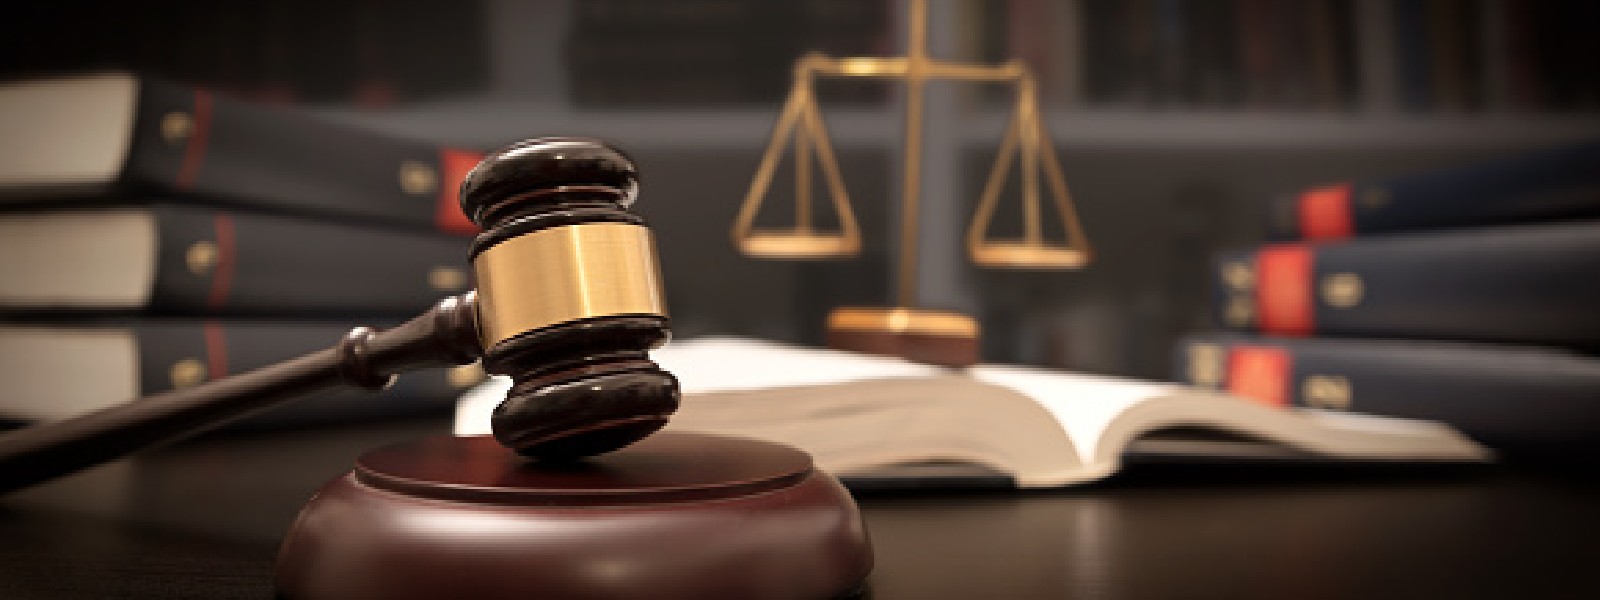 Colombo Court sentences man to 10 years in prison for siphoning doctors’ salaries in 2003